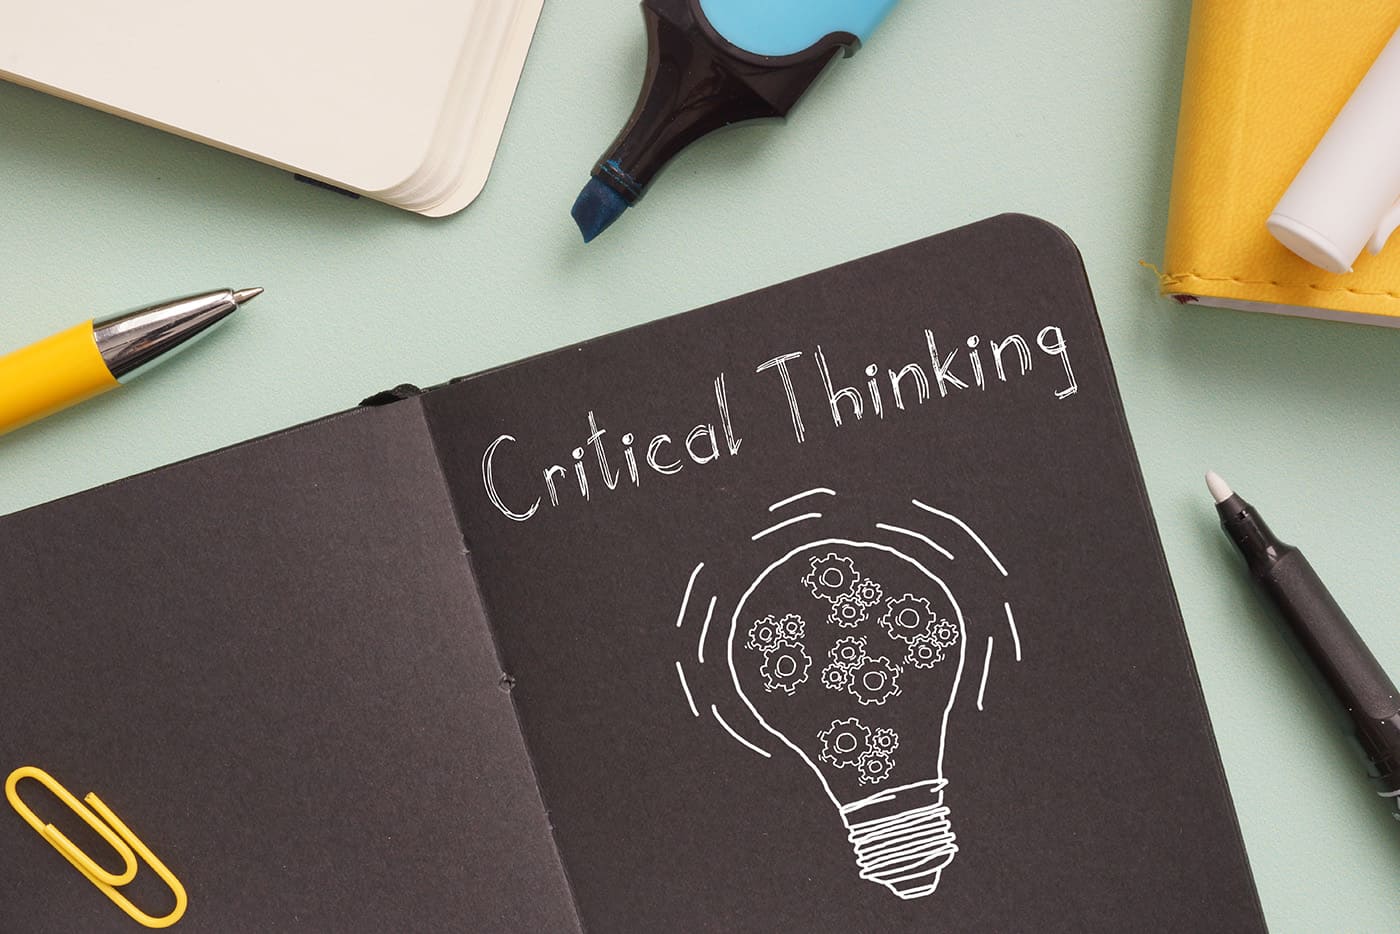 13 Easy Steps To Improve Your Critical Thinking Skills | Bernard Marr